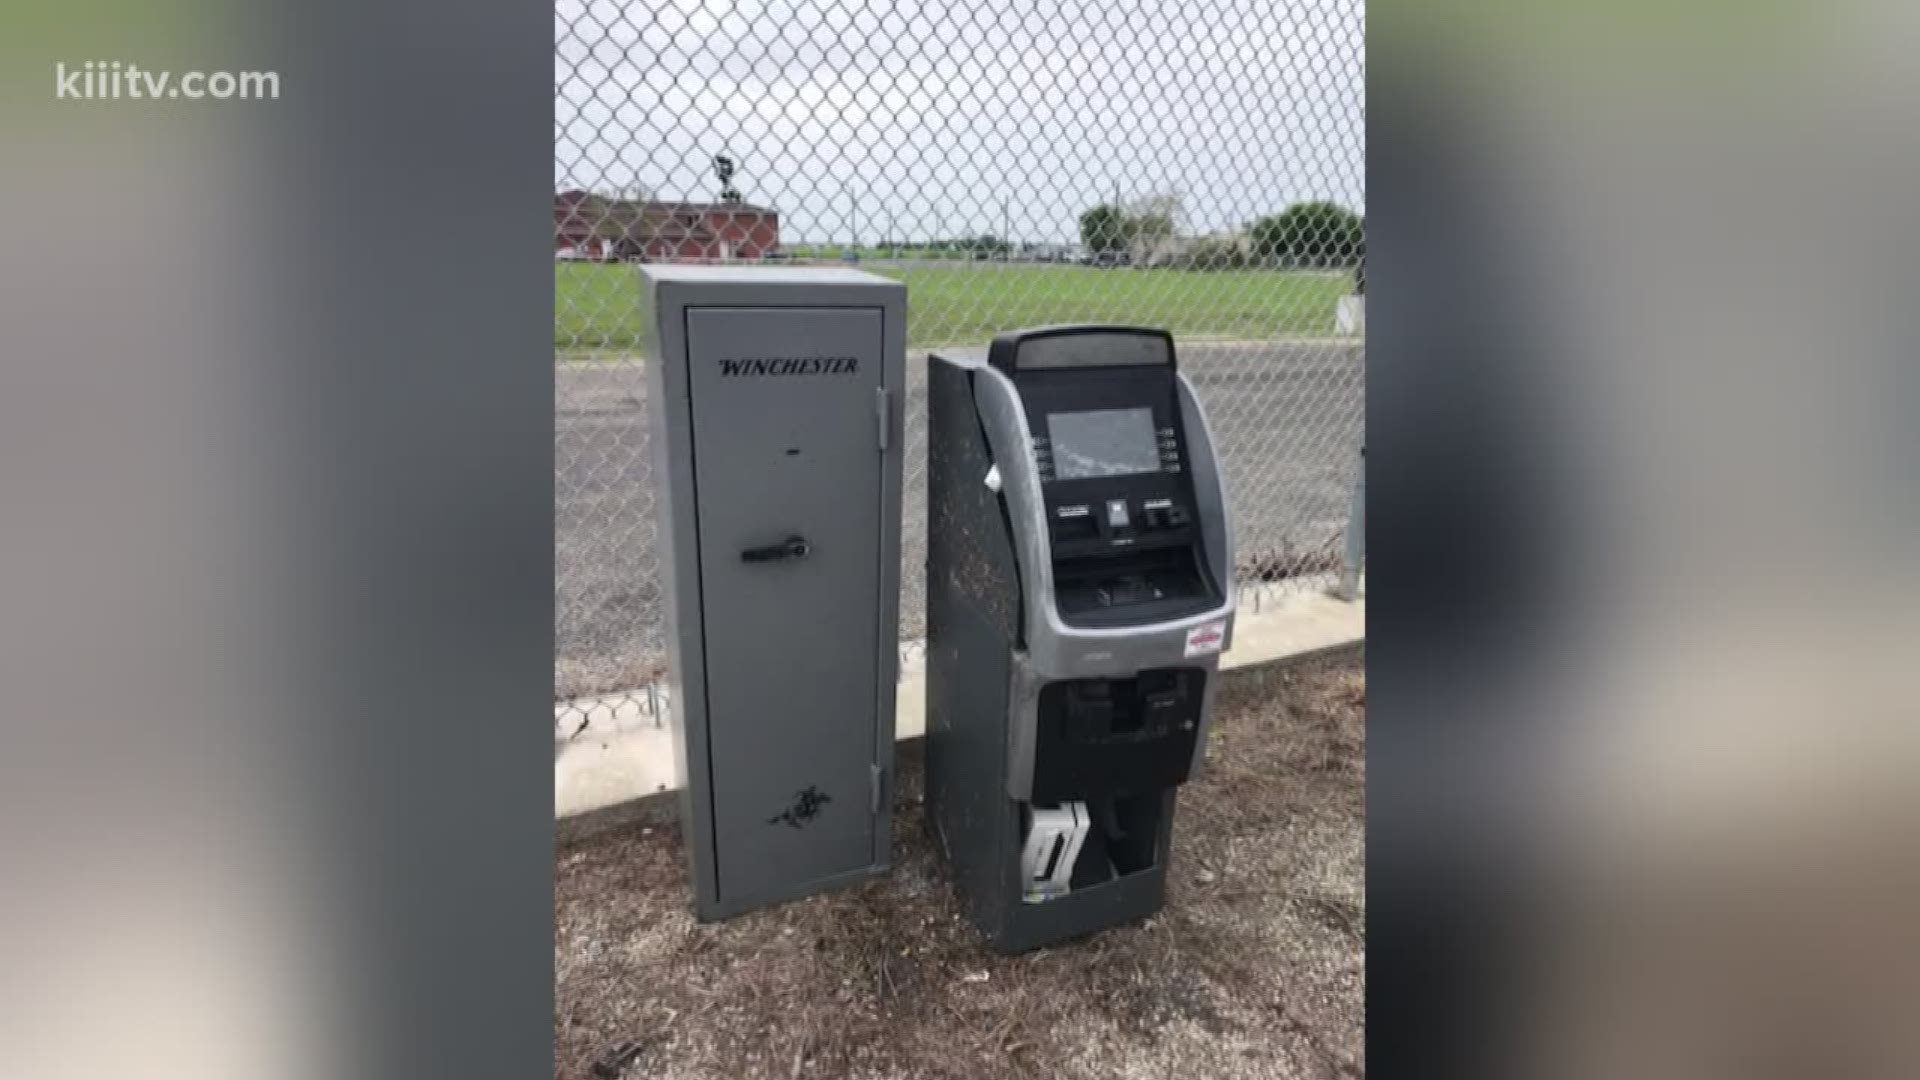 Nueces County Park Department employees working to clean up near the Laguna Madre on Wednesday stumbled upon a Winchester gun safe and an ATM.